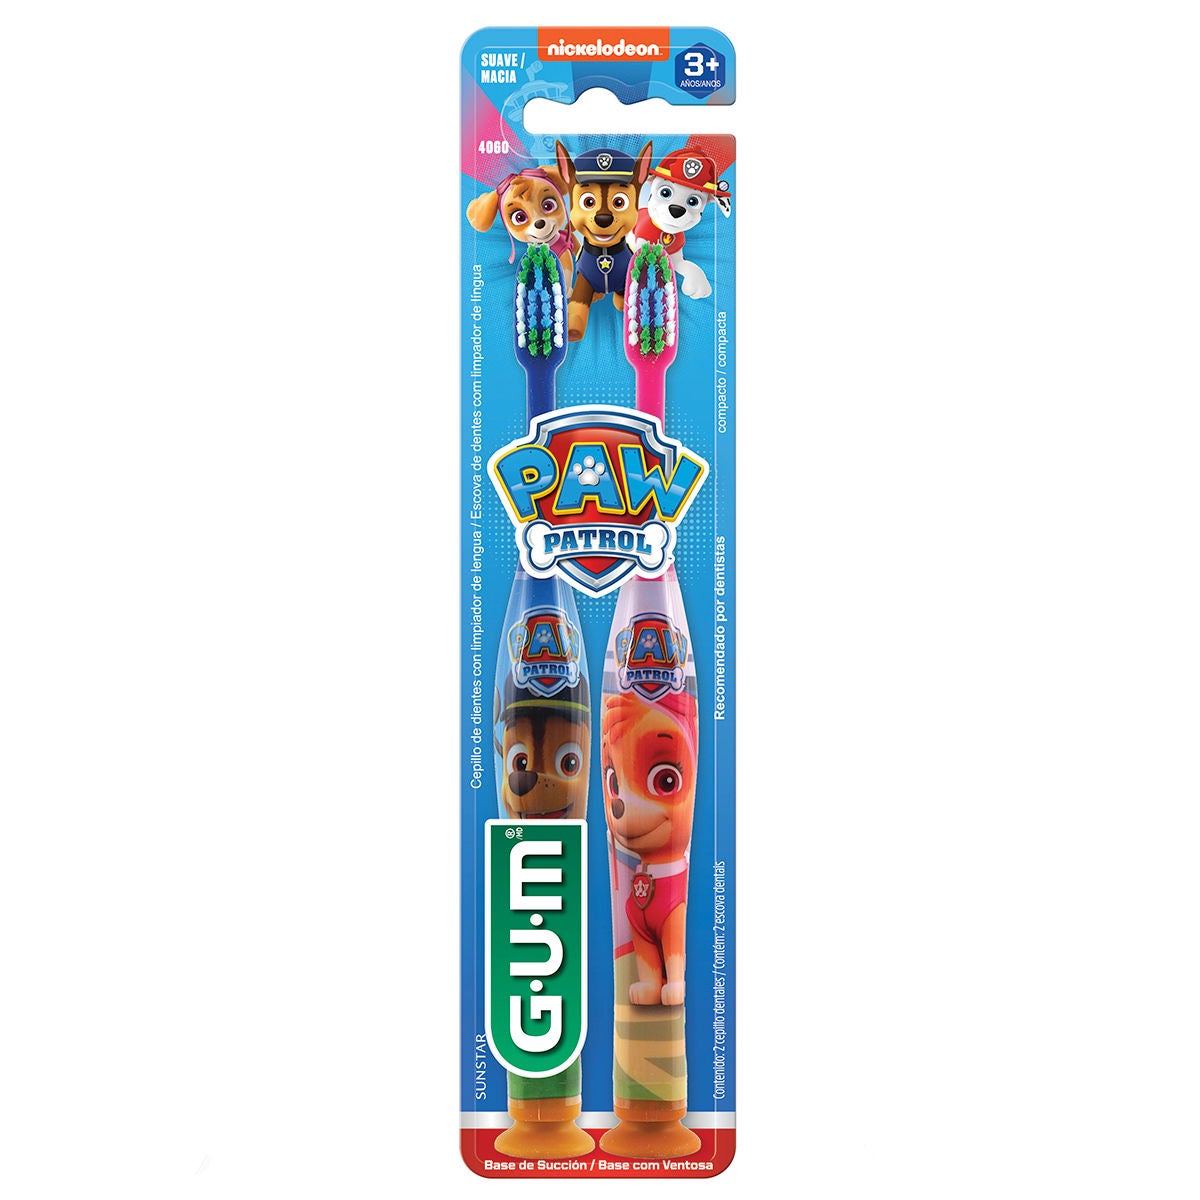 4060PPY-Product-Packaging-Toothbrush-PAWPatrol-front-2ct.jpg